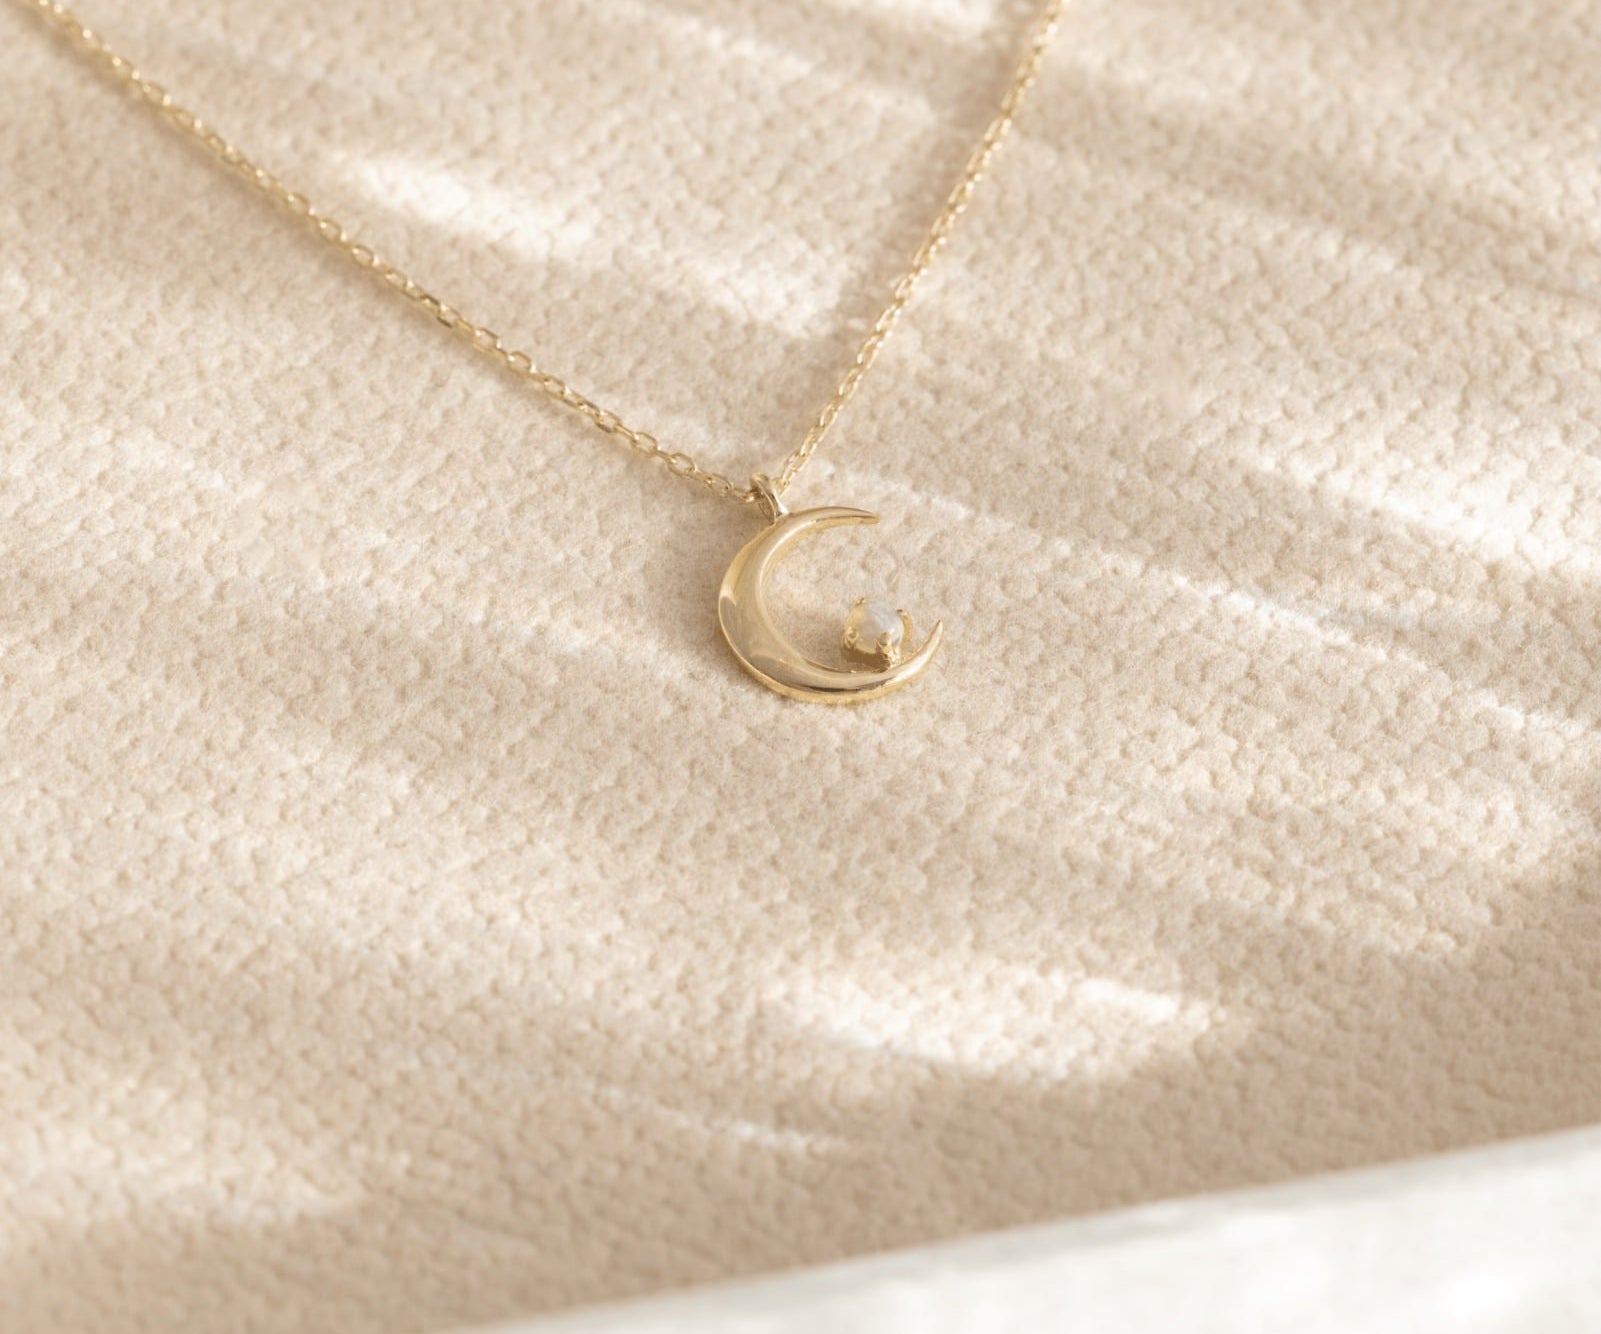 Picture of Luna Rae Solid 9k Gold Selene Necklace